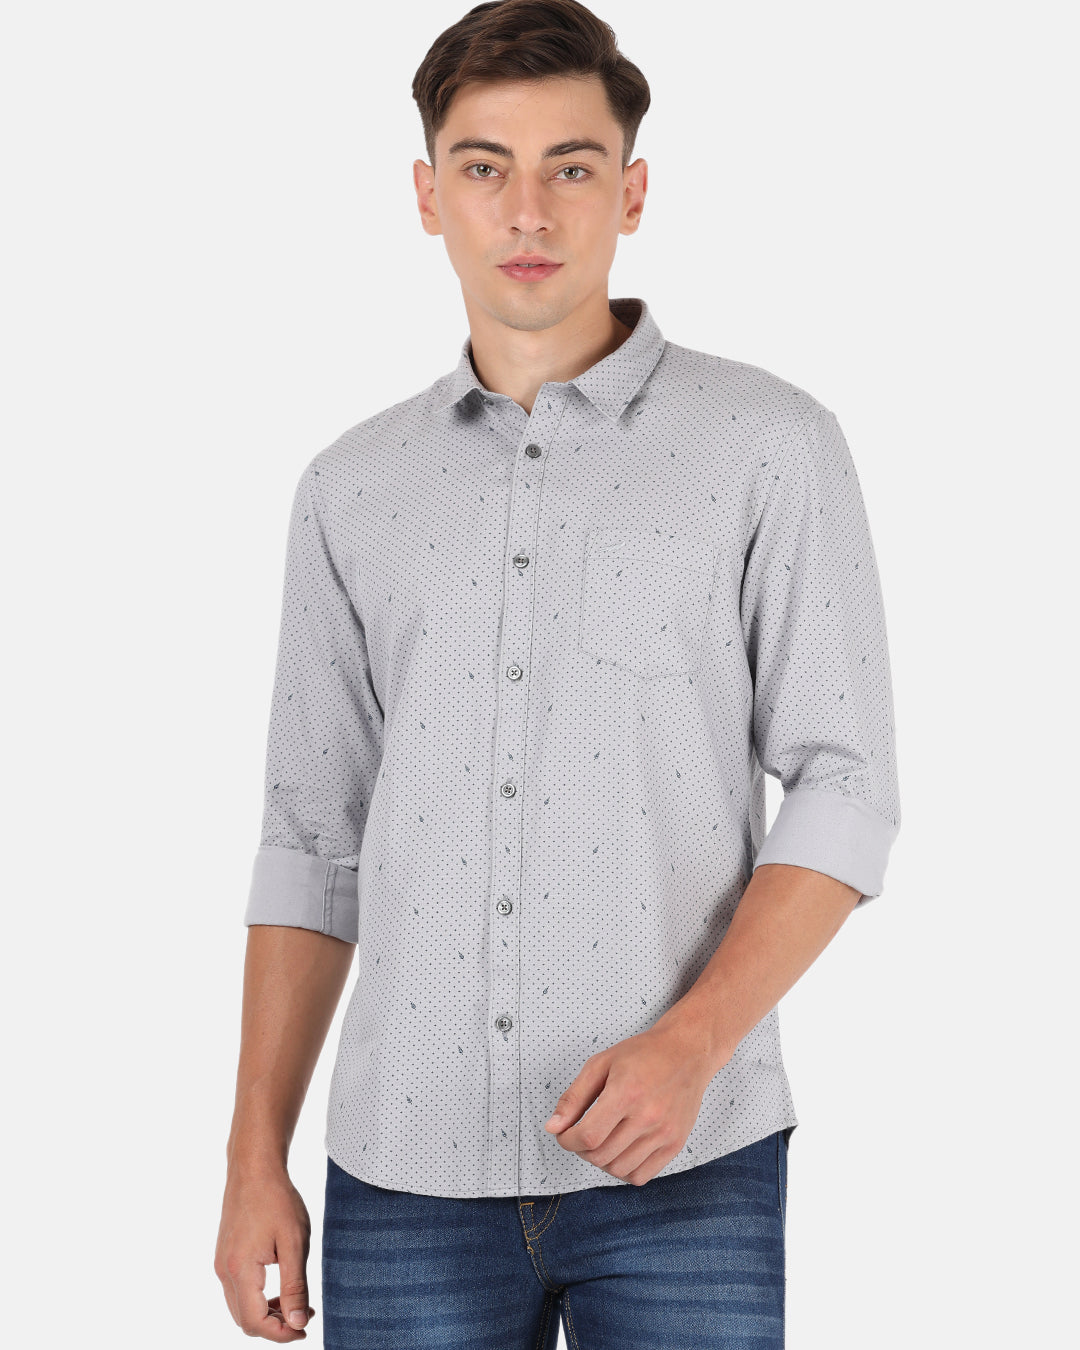 Crocodile Casual Full Sleeve Slim Fit Printed Steel Grey with Collar Shirt for Men